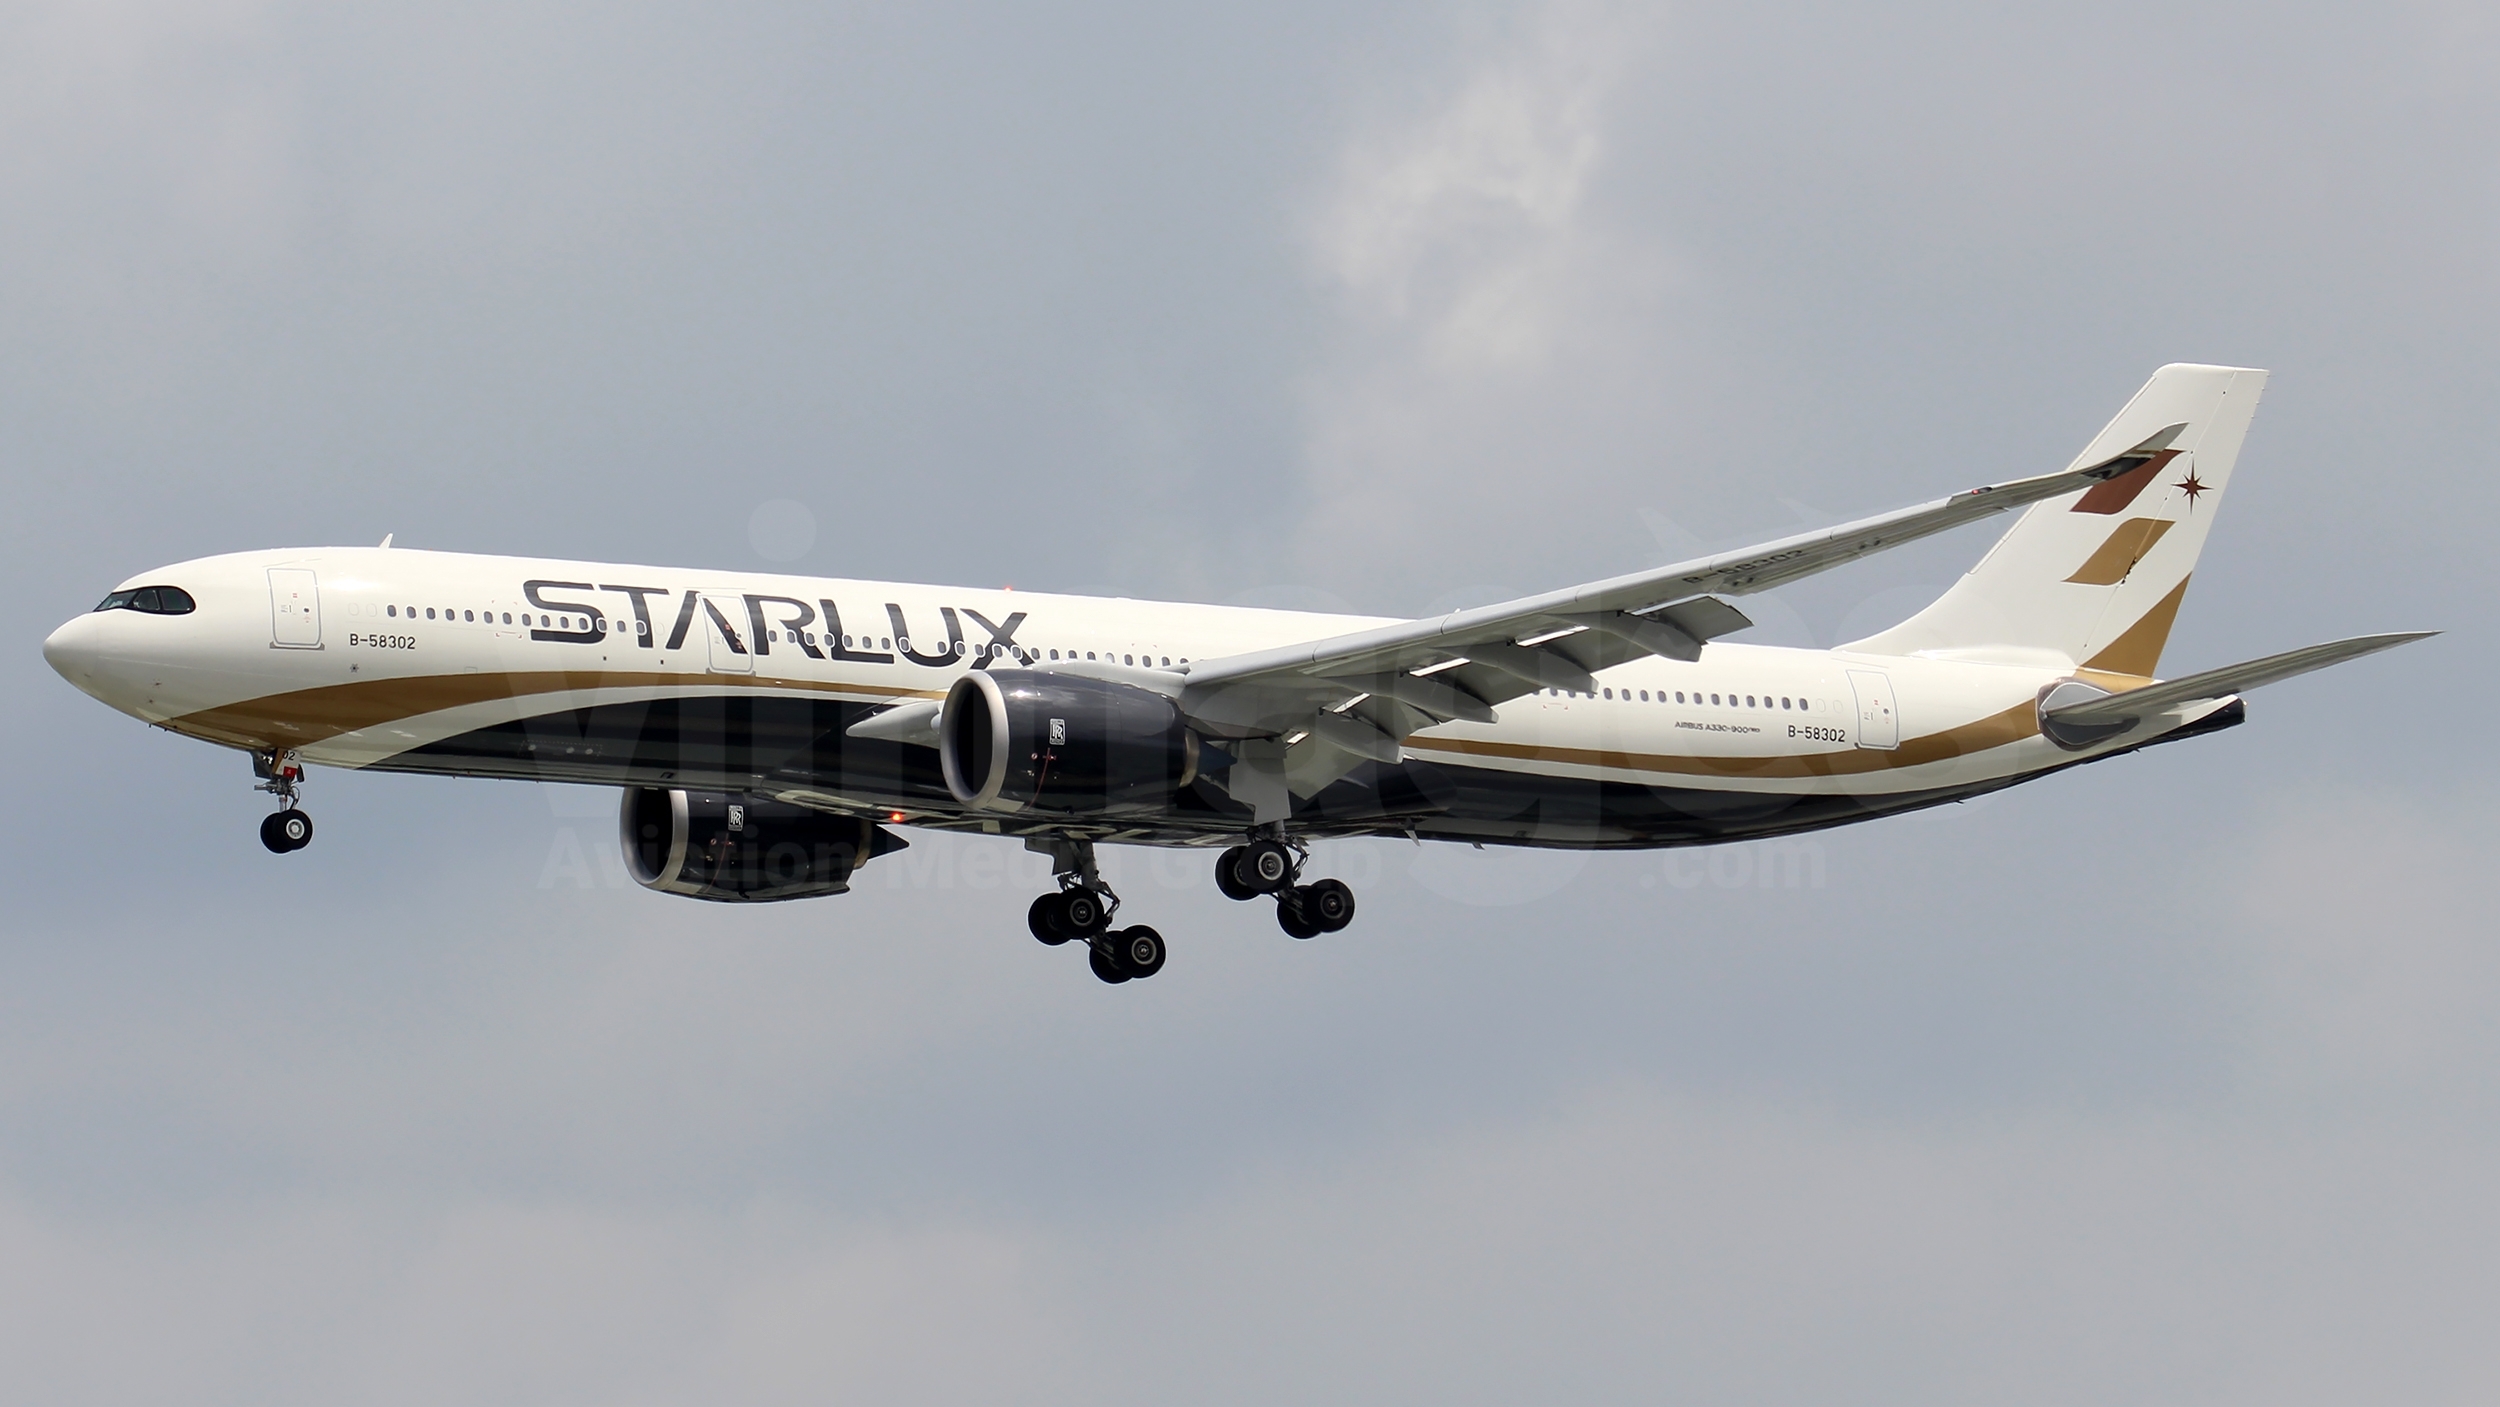 STARLUX Airlines Airbus A330-941 B-58302 – v1images Aviation Media